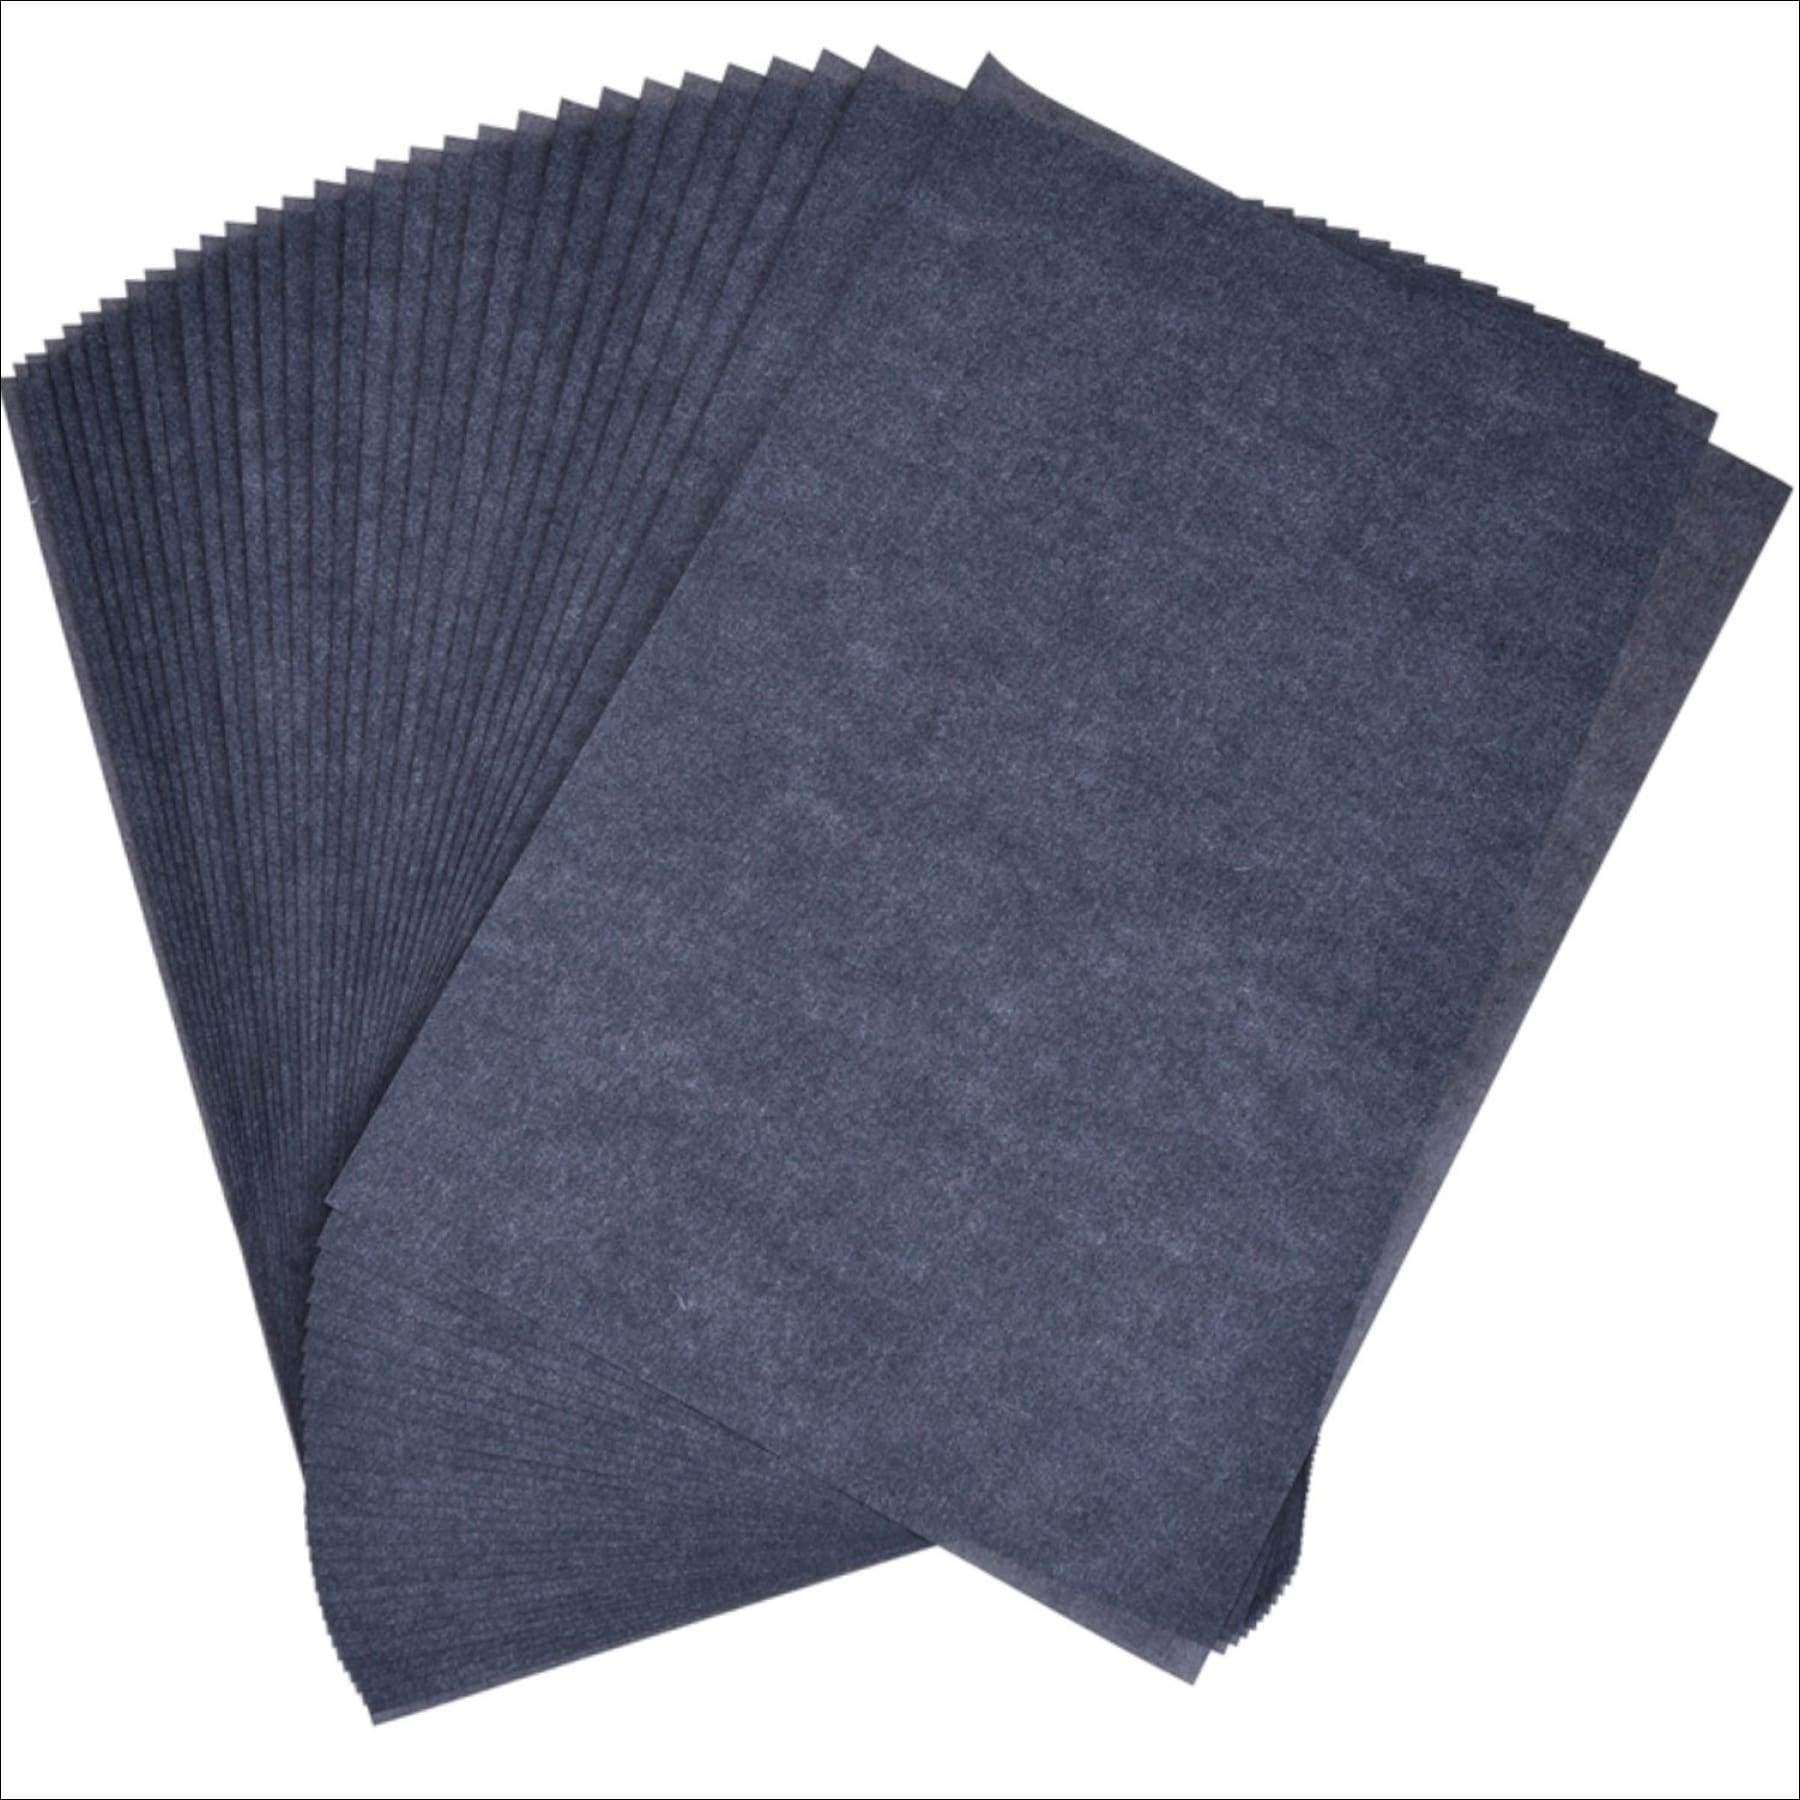 Carbon paper for fabric